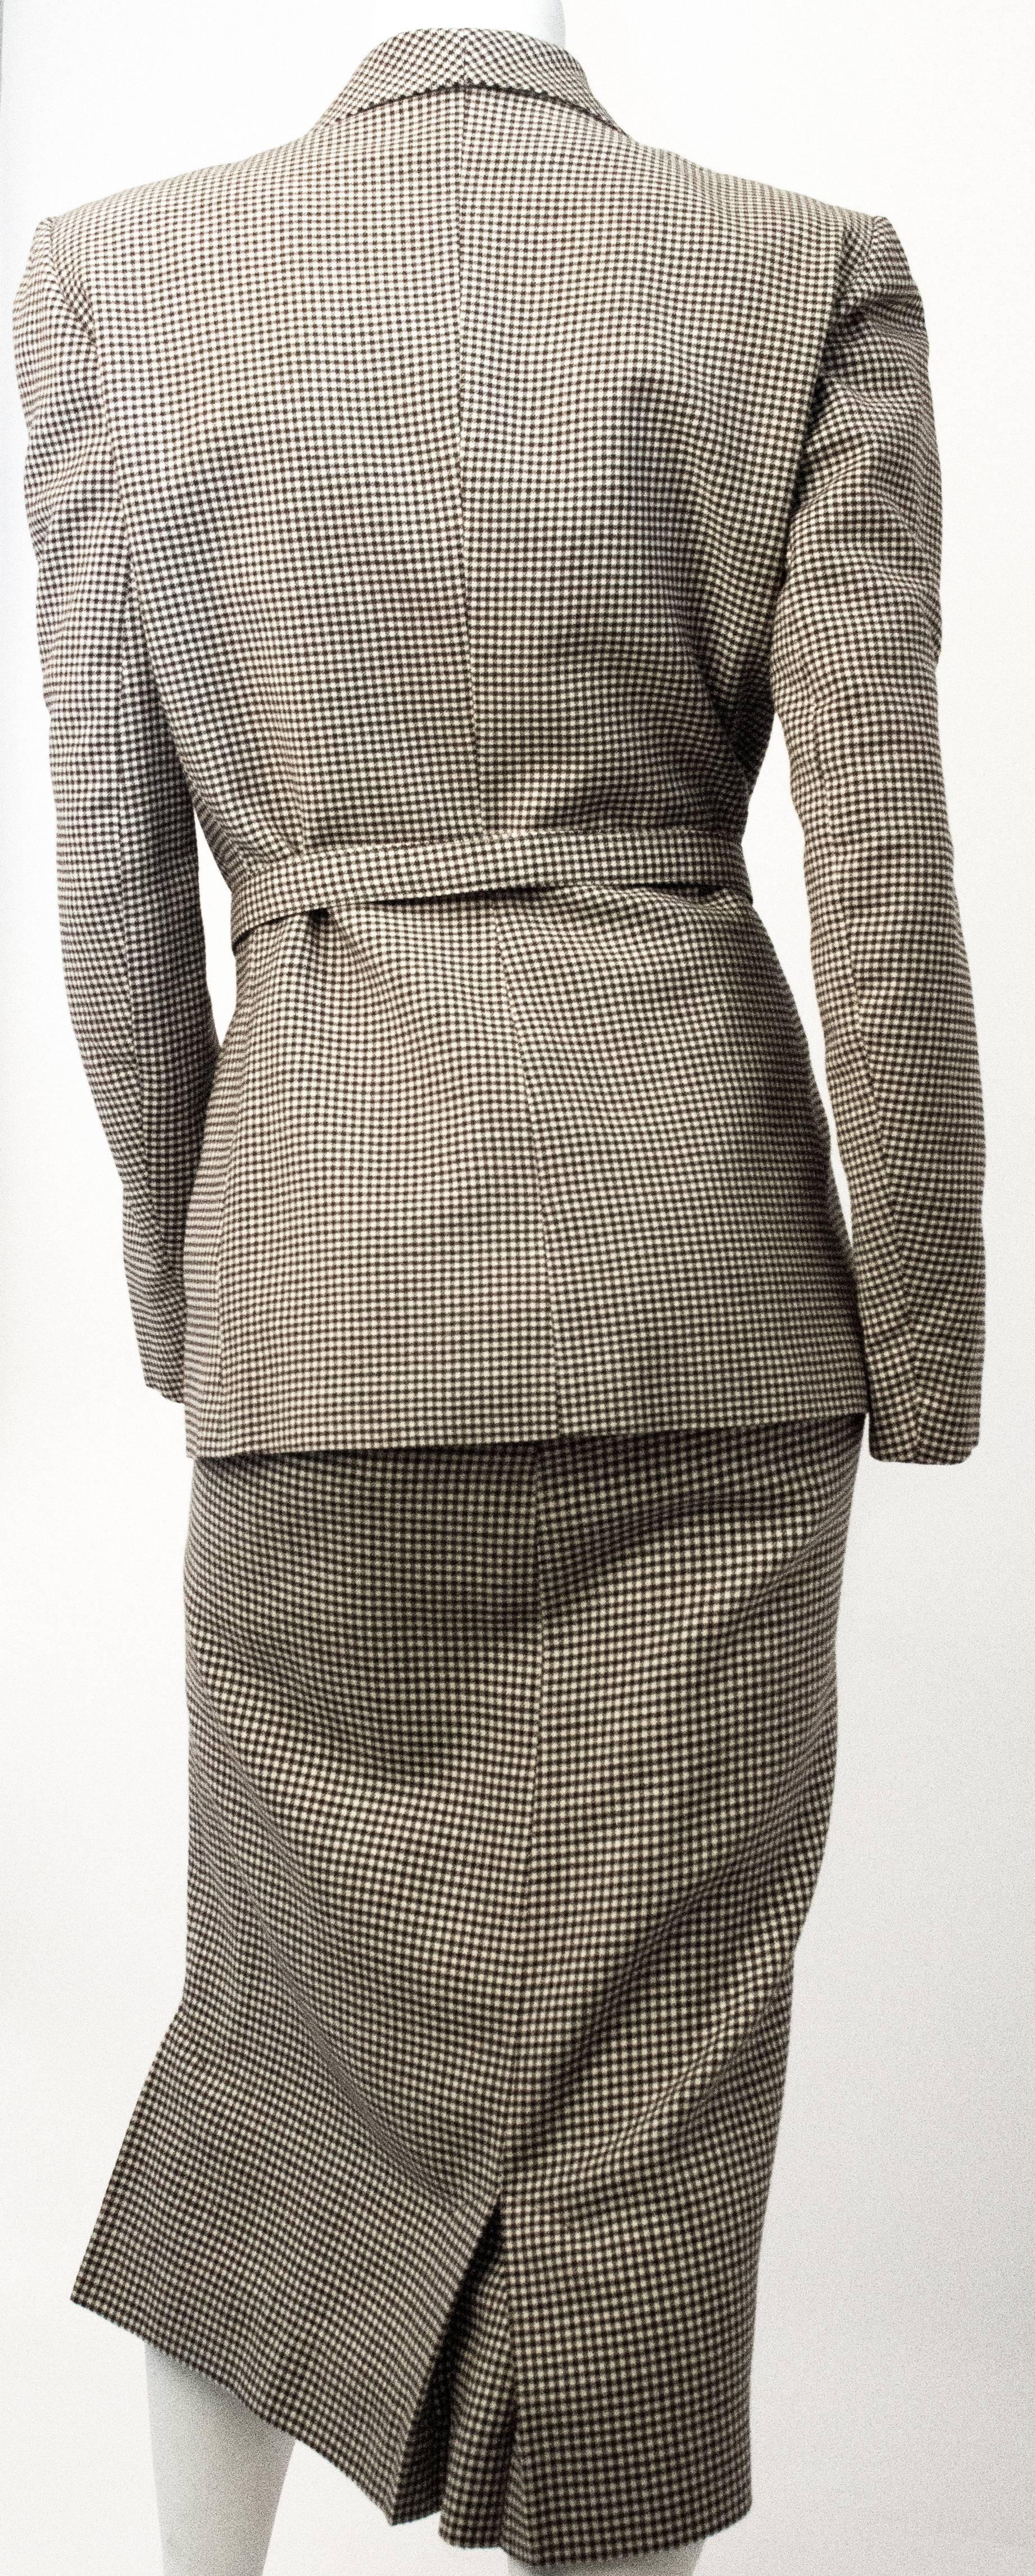 40s Joseph Magnin Brown and Cream Gingham Skirt Suit. Jacket is lined. Covered buttons secure the front. One small pocket on the right side. Original belt included. Skirt is unlined, zips up the side and has kick pleats. 